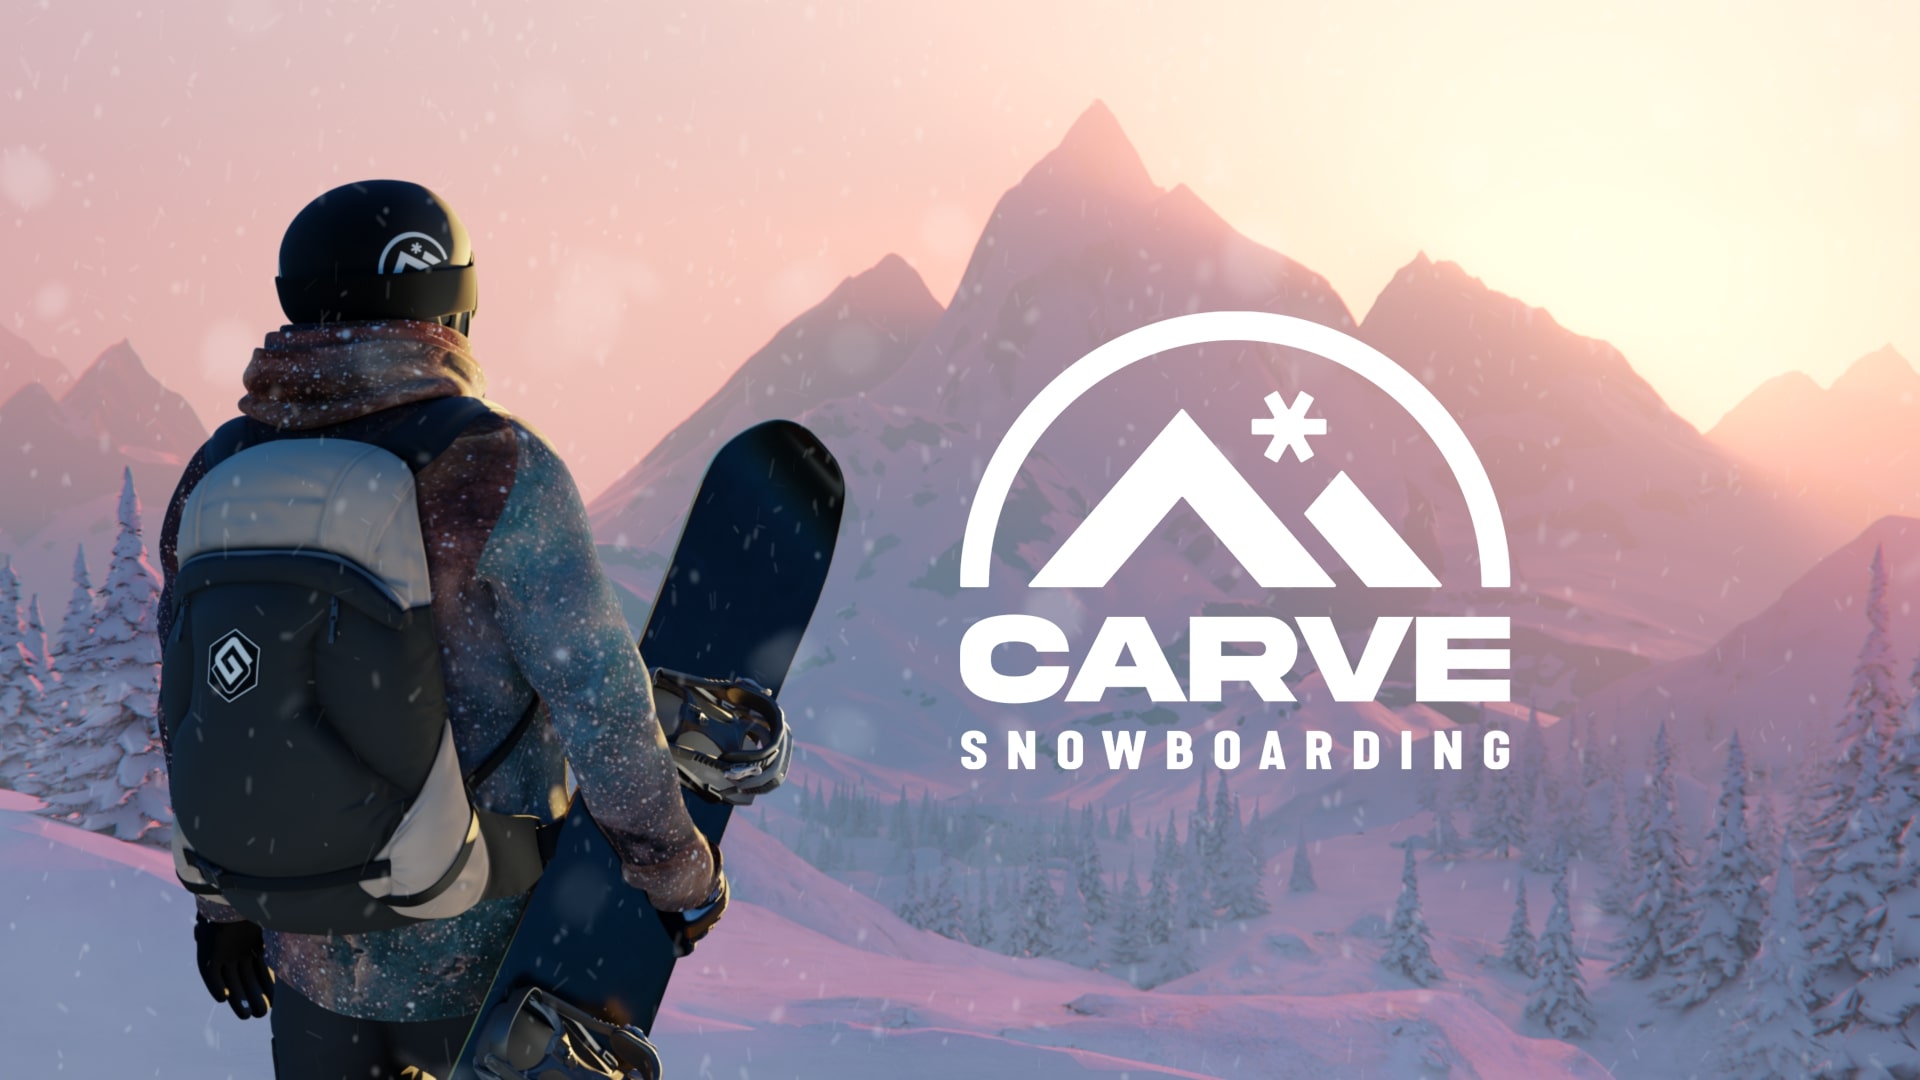 A virtual reality snowboarding game has been announced